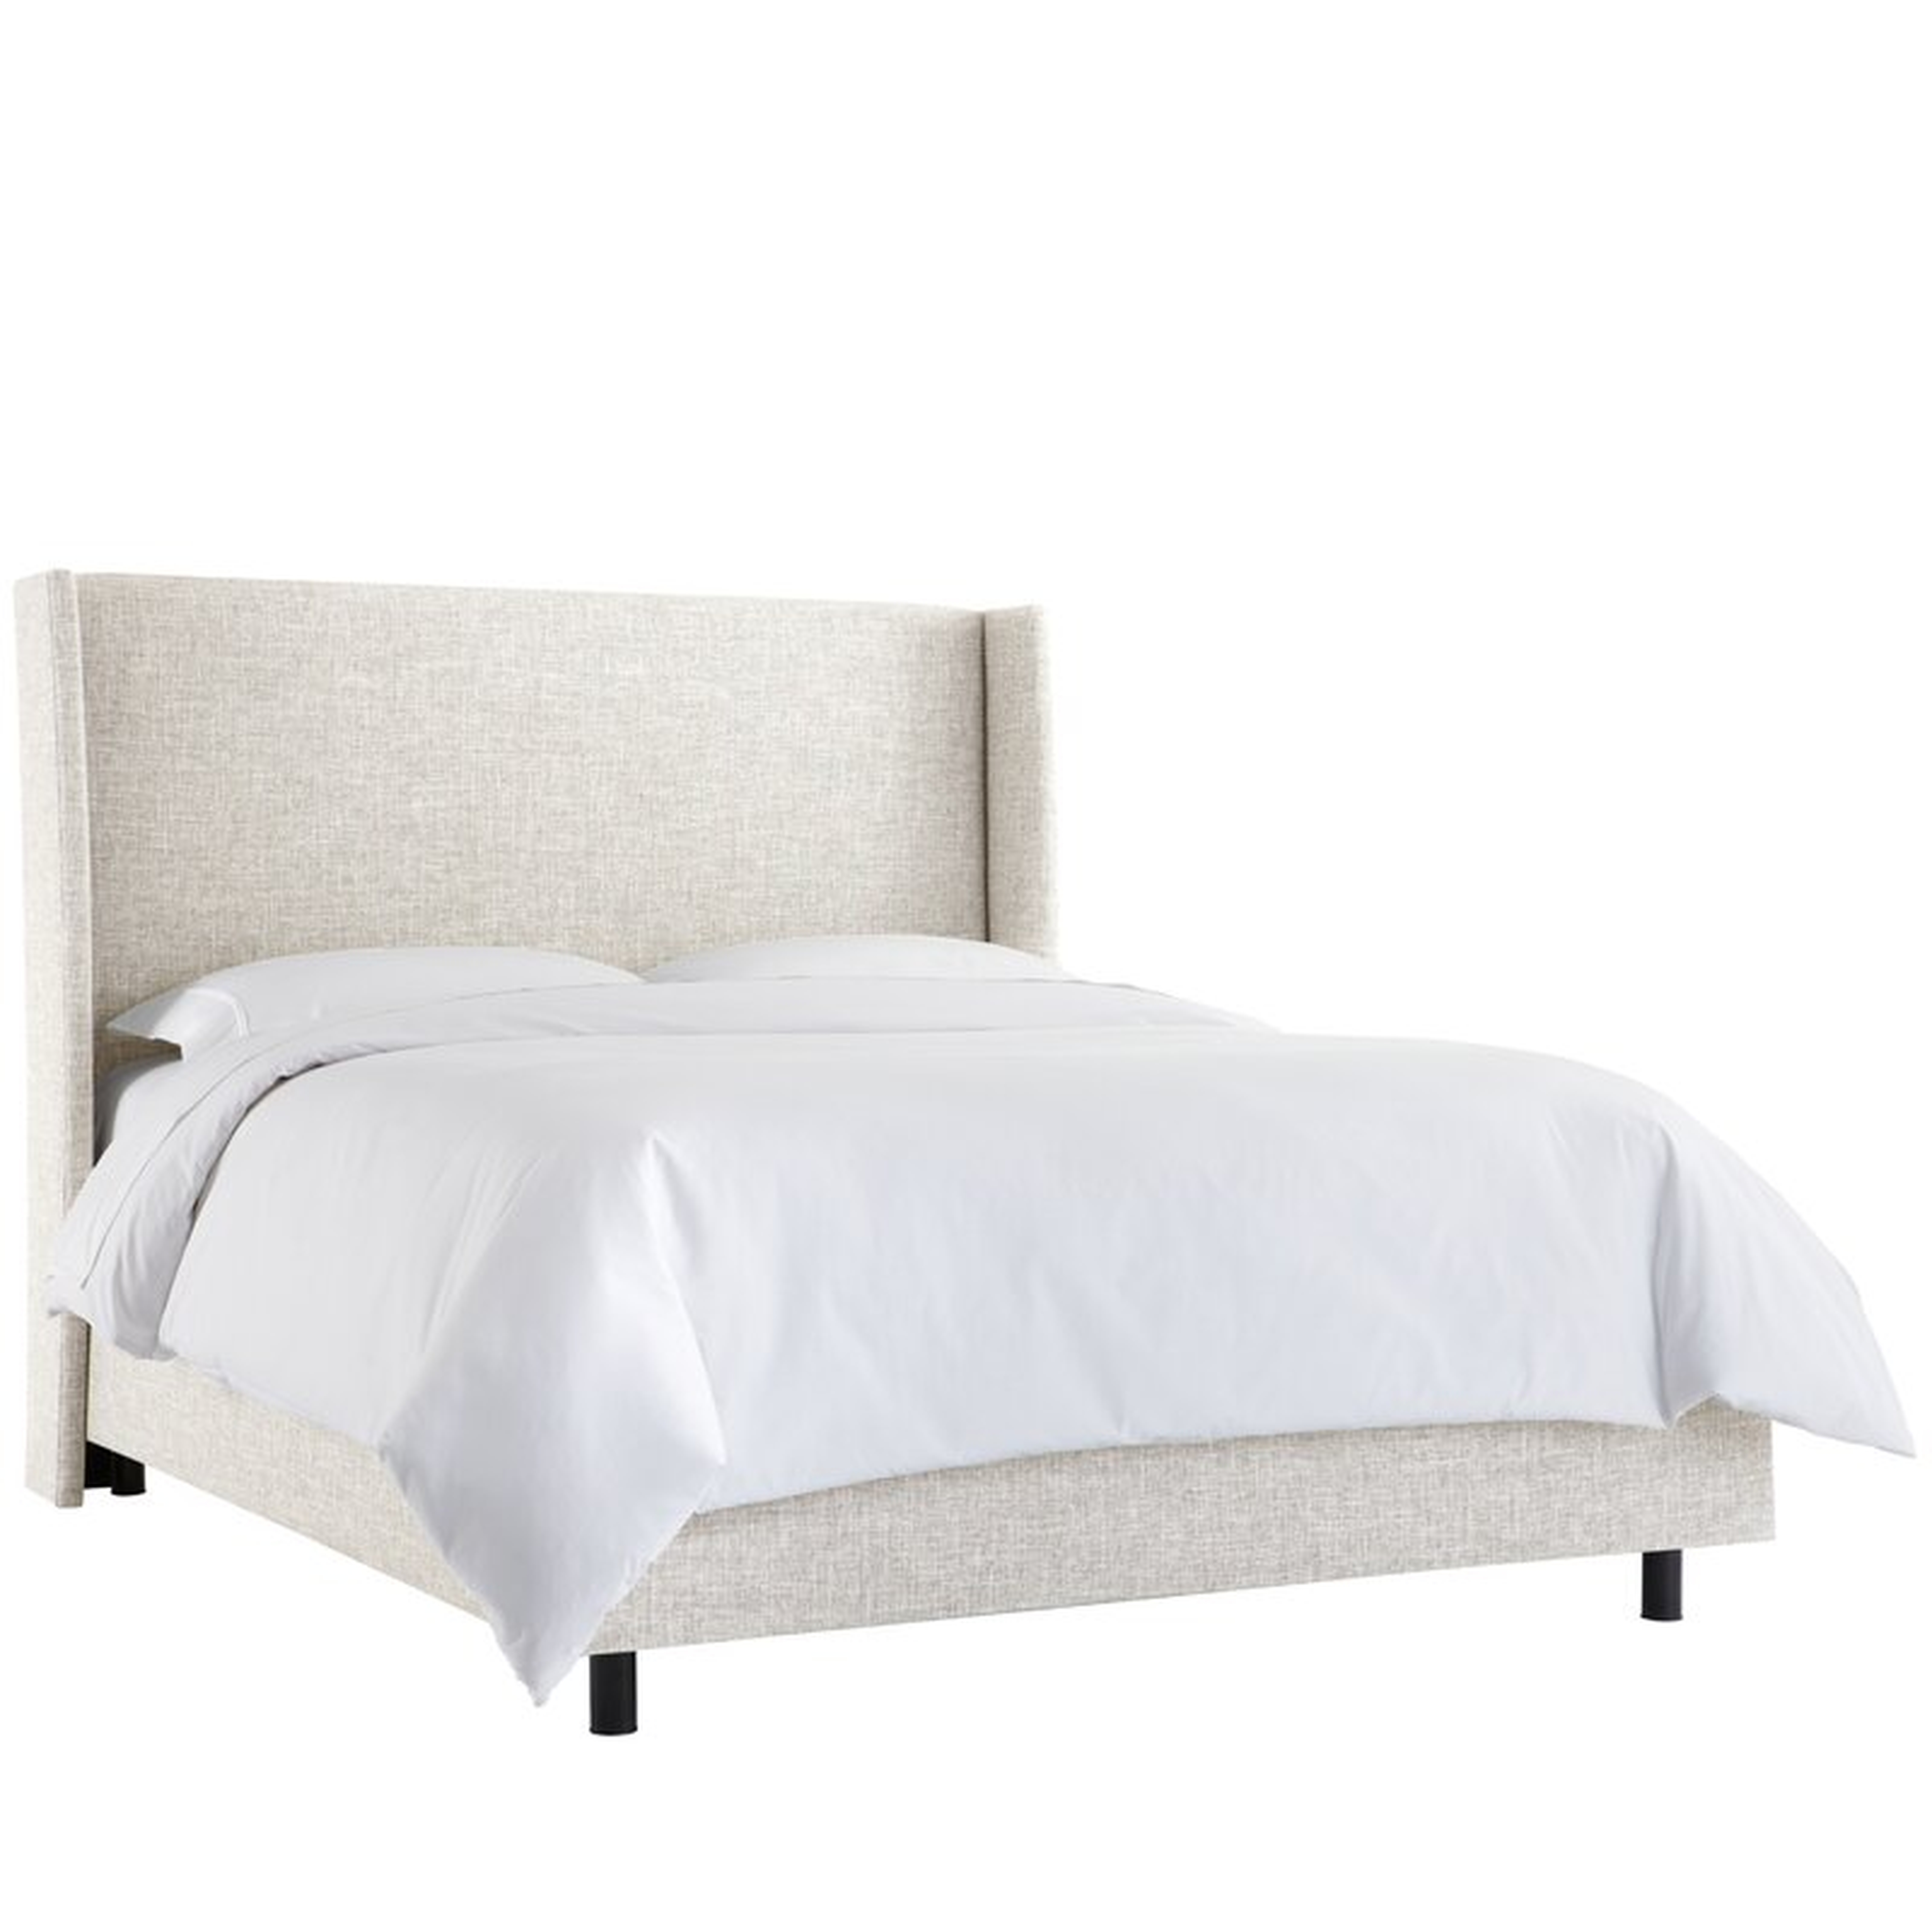 Tilly Upholstered low profile standard Bed- King Zuma White - Wayfair